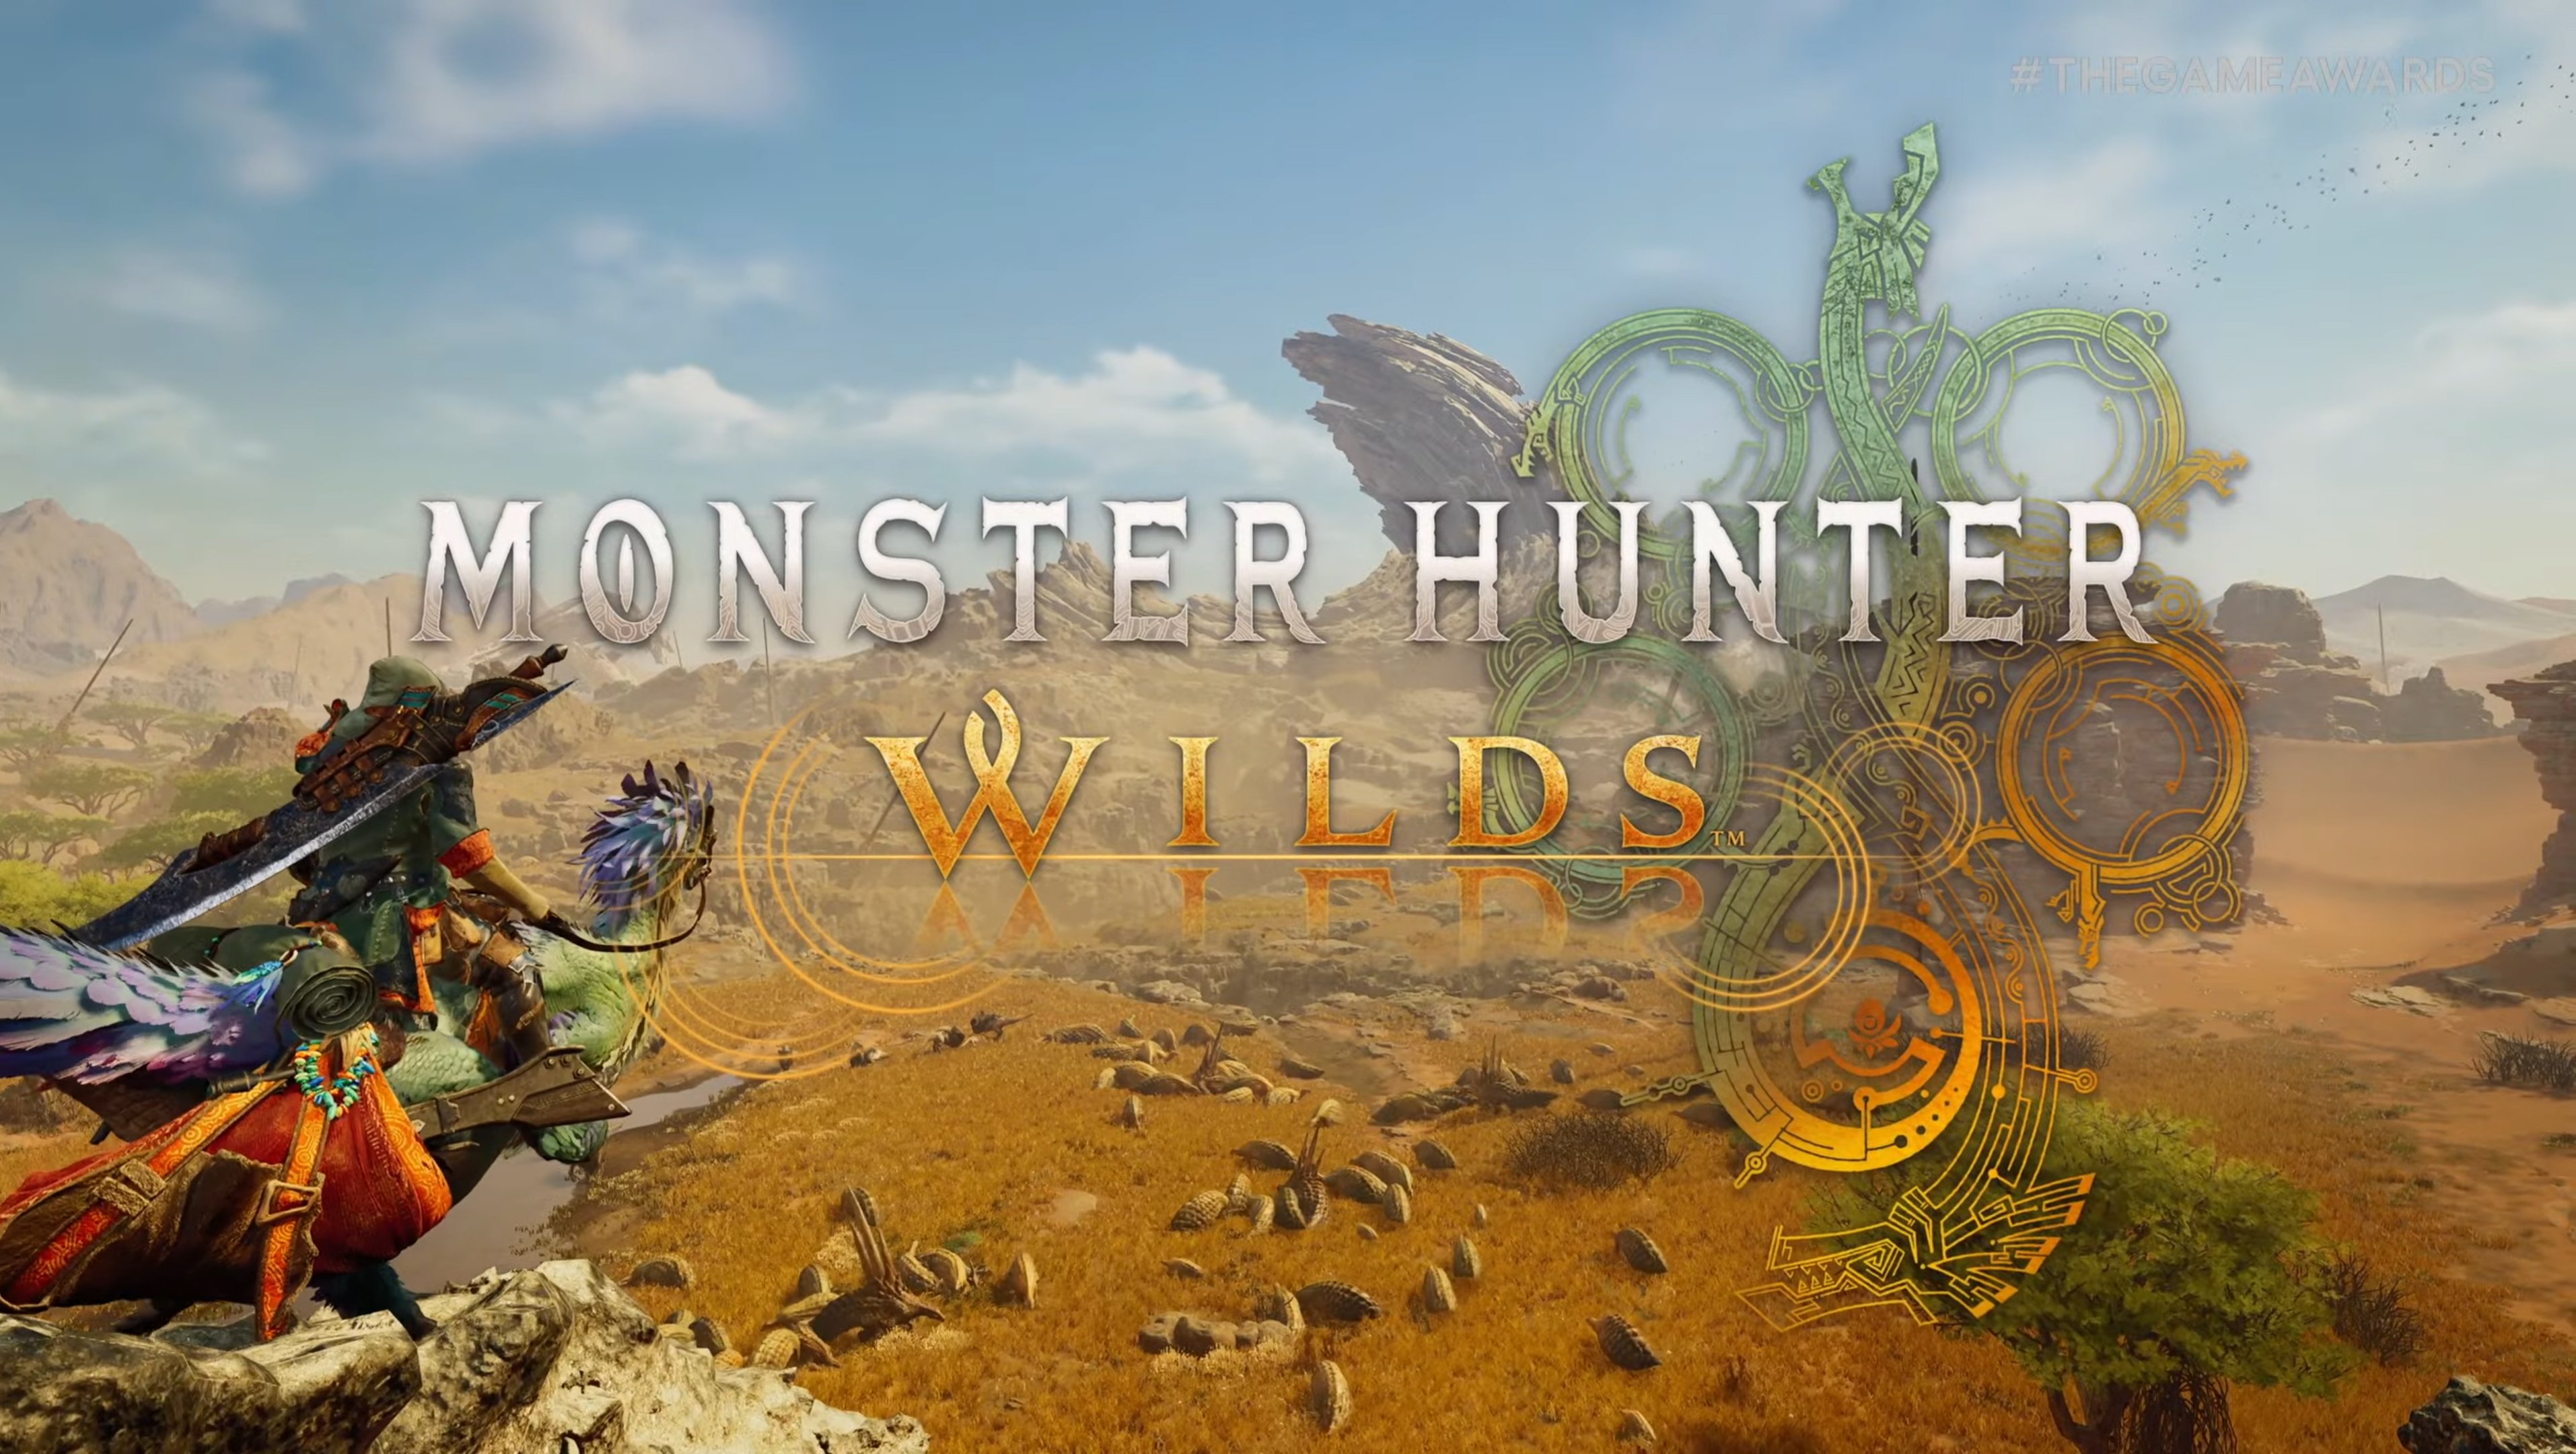 Hunter RPG 'Onigo Hunter' Comes to Xbox Consoles and PC May 26